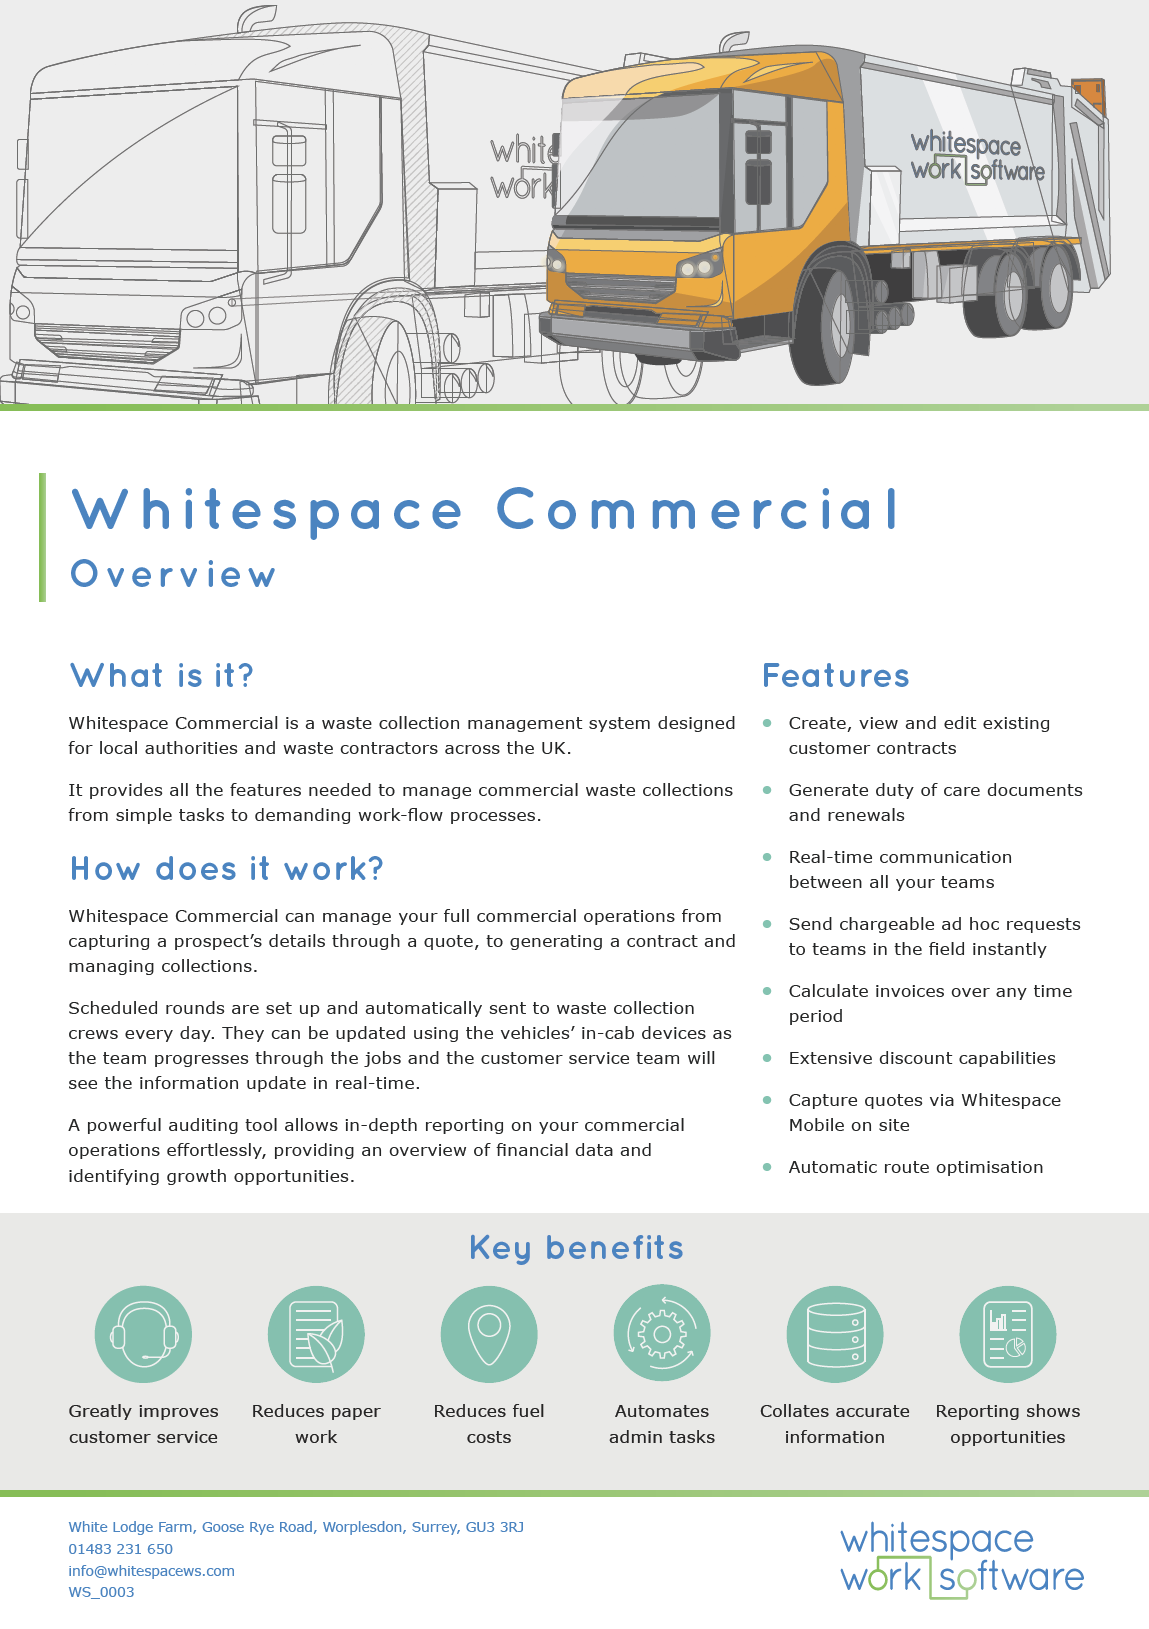 Whitespace Commercial